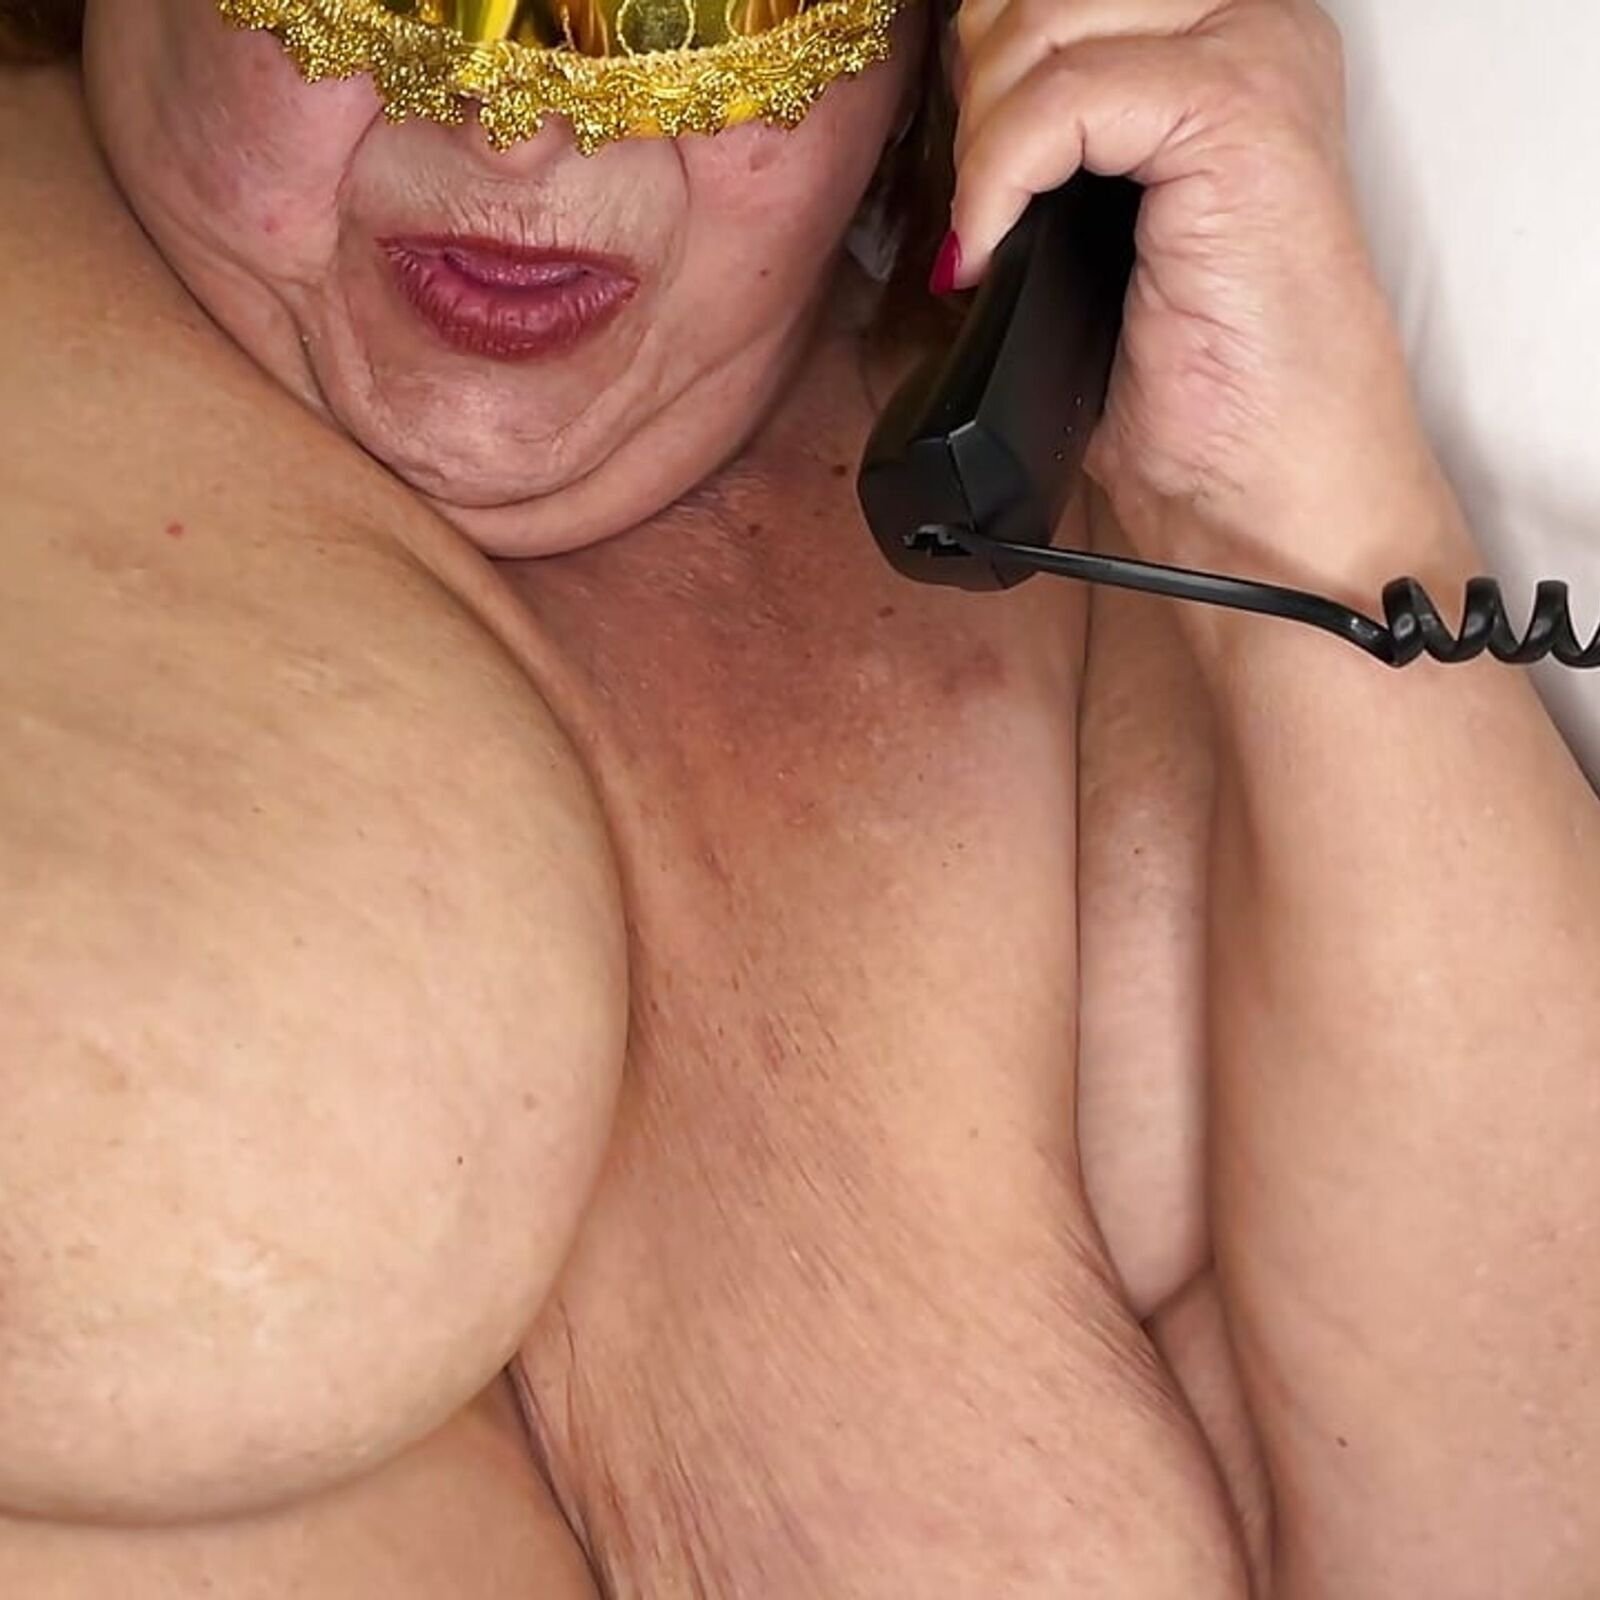 They called the hot line the blonde grandmother and she became very horny and reached an orgasm